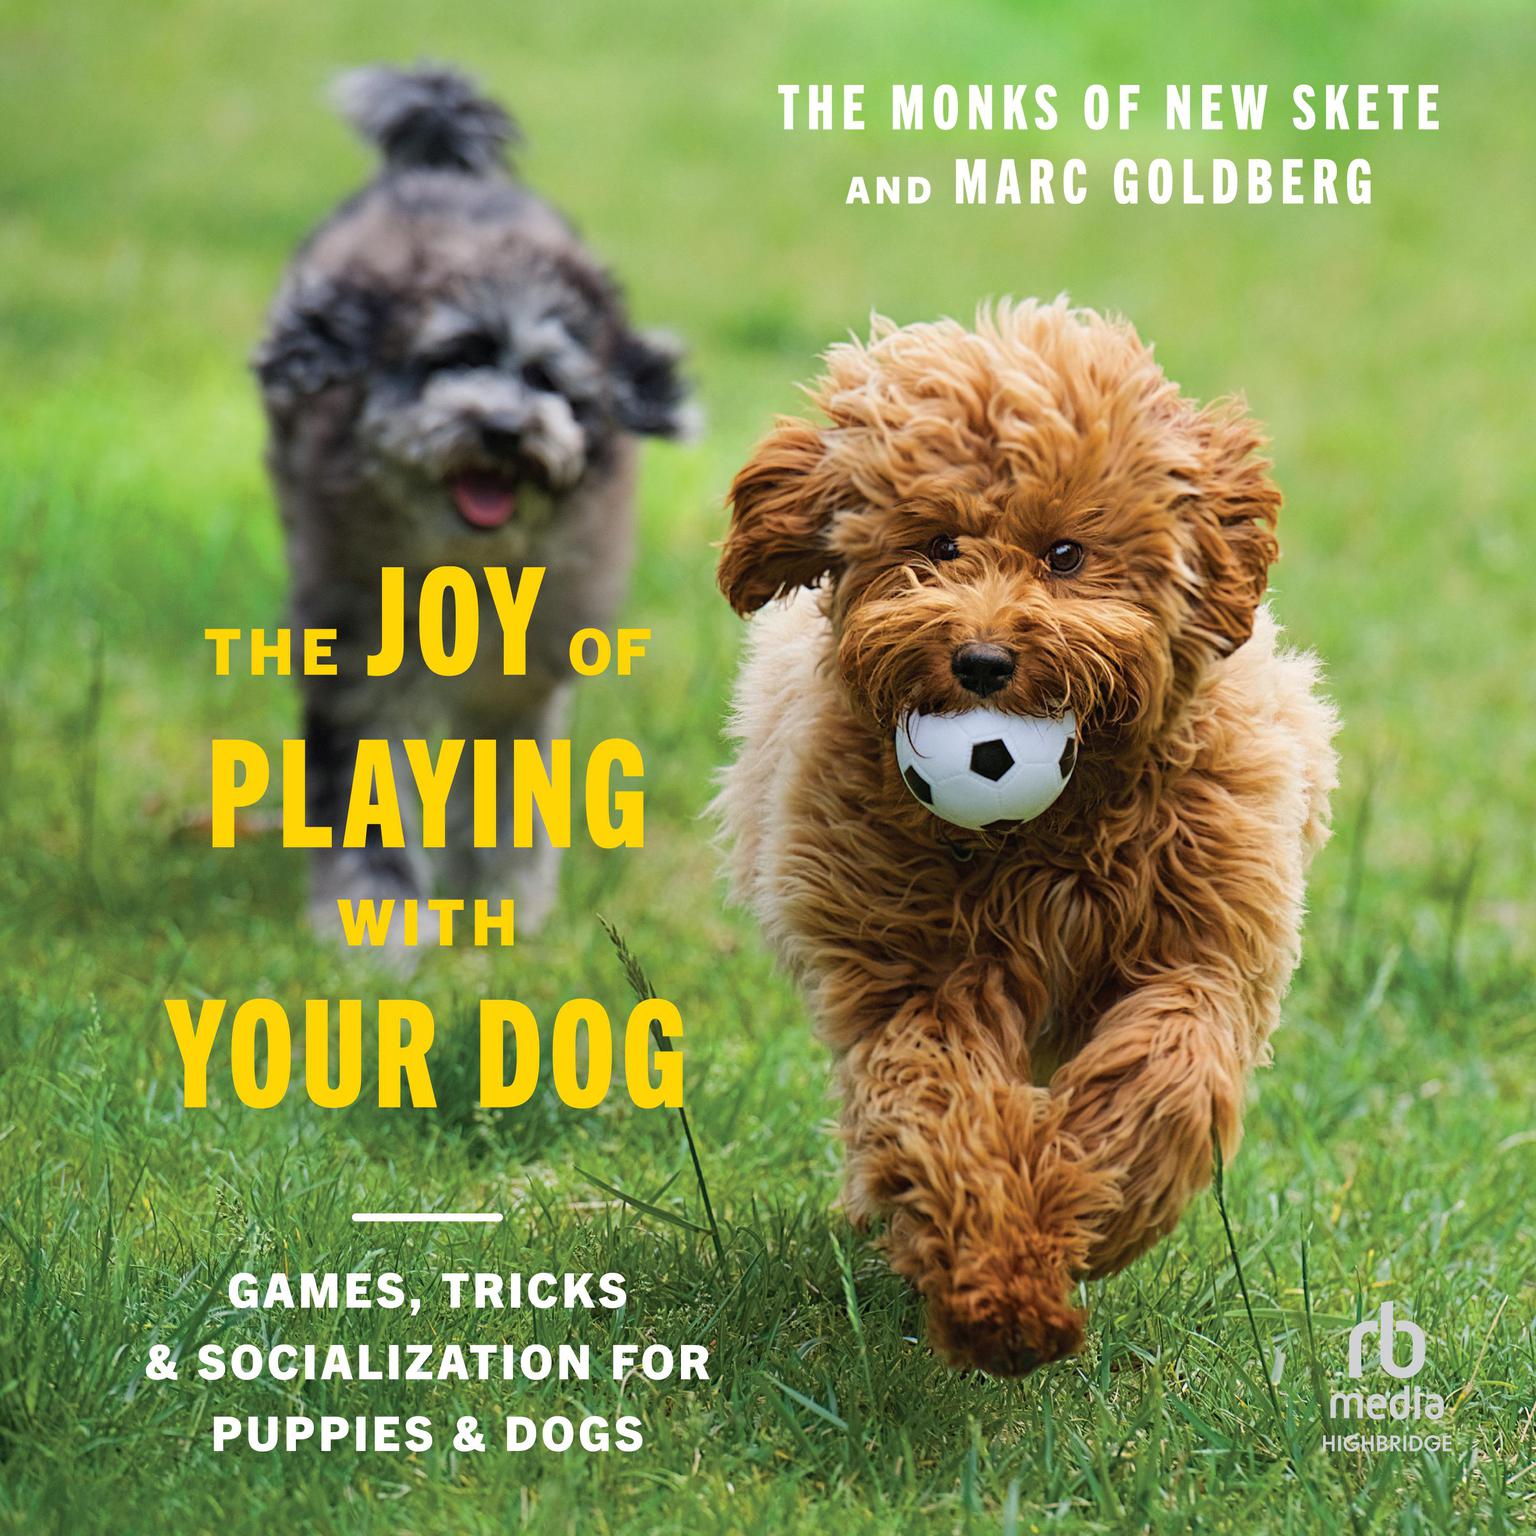 The Joy of Playing with Your Dog: Games, Tricks, & Socialization for Puppies & Dogs Audiobook, by Marc Goldberg